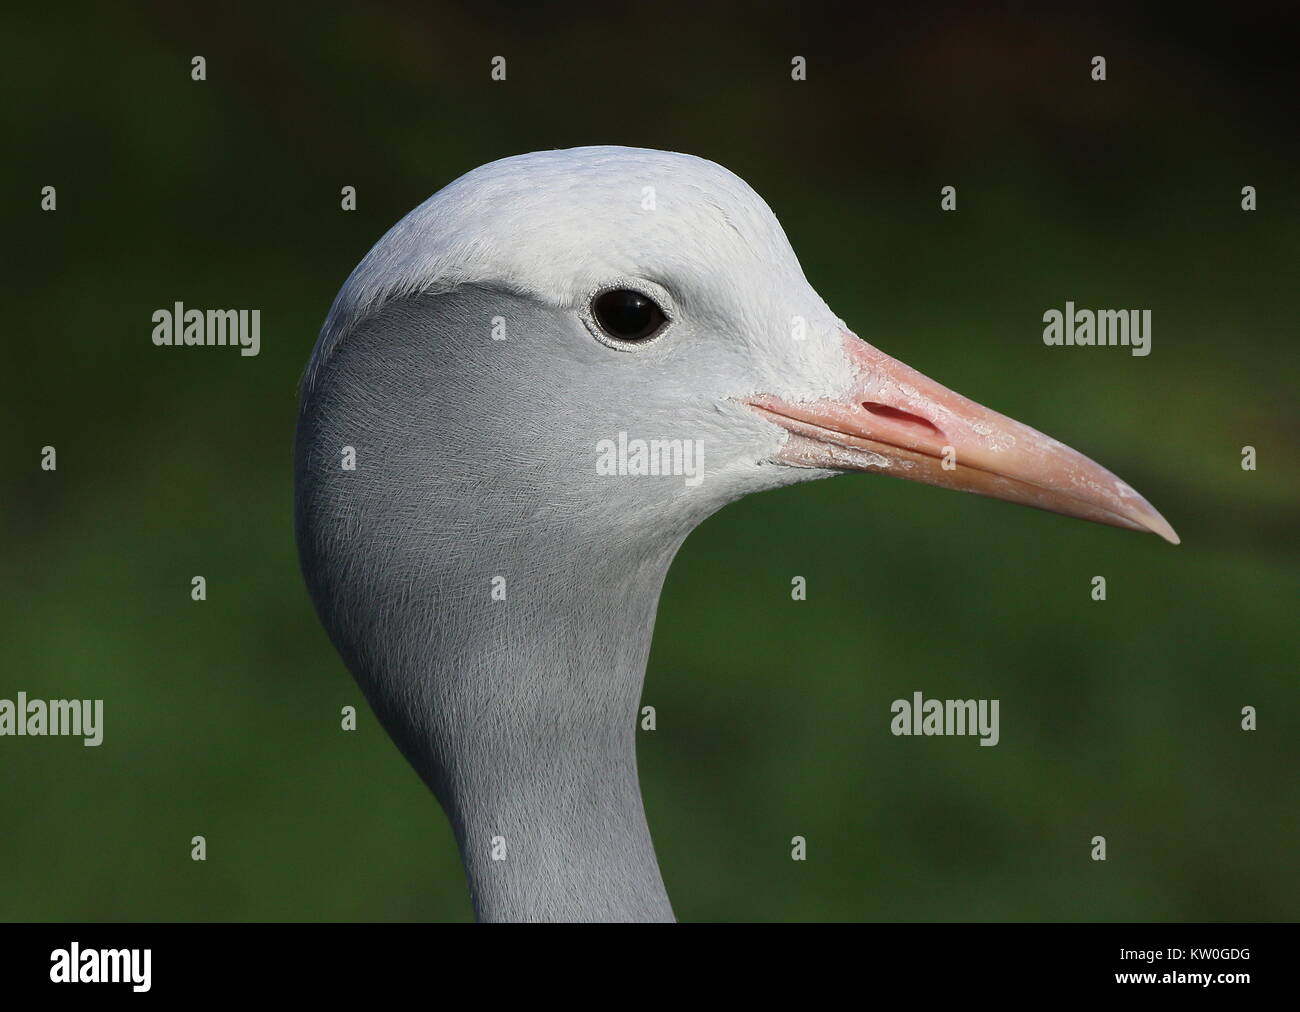 Closeup of the head of a South African Blue Crane (Grus paradisea, Anthropoides paradisea), a.k.a. Paradise or Stanley crane. Stock Photo